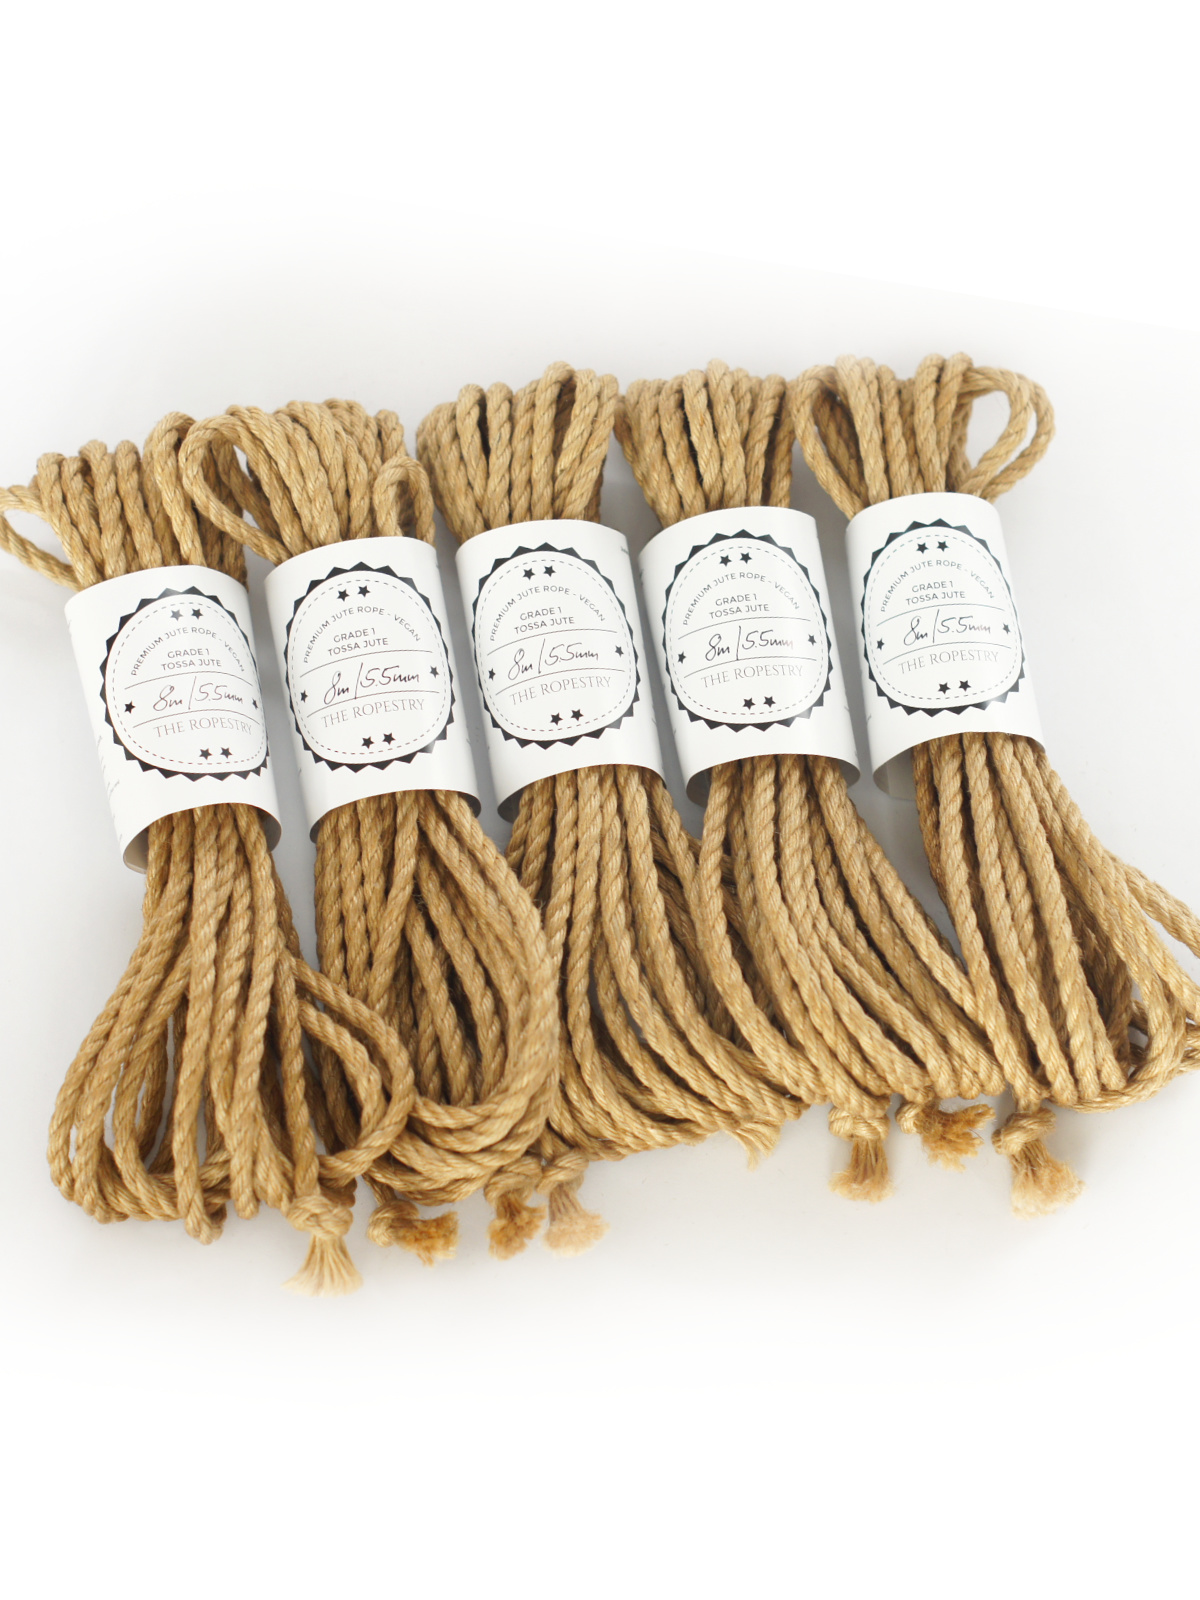 B-STOCK 5pc set, ∅ 5.5mm, 8m, jute rope, ready for use